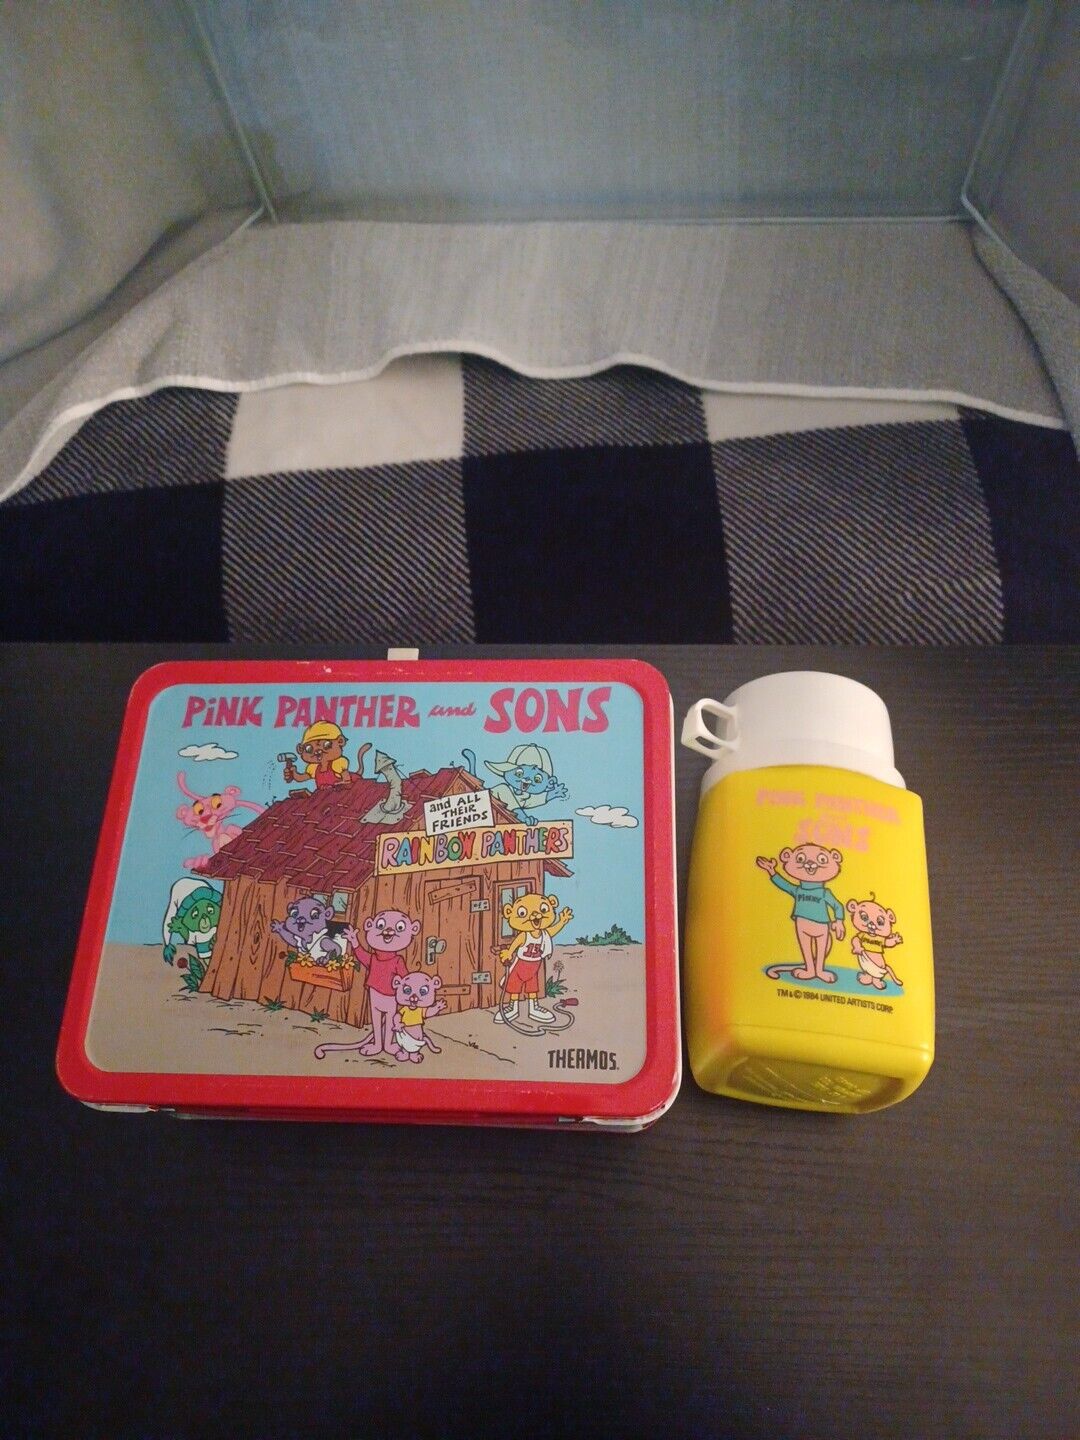 Vintage 1984 The Pink Panther And Sons Lunchbox And Matching Thermos Nice Cond 